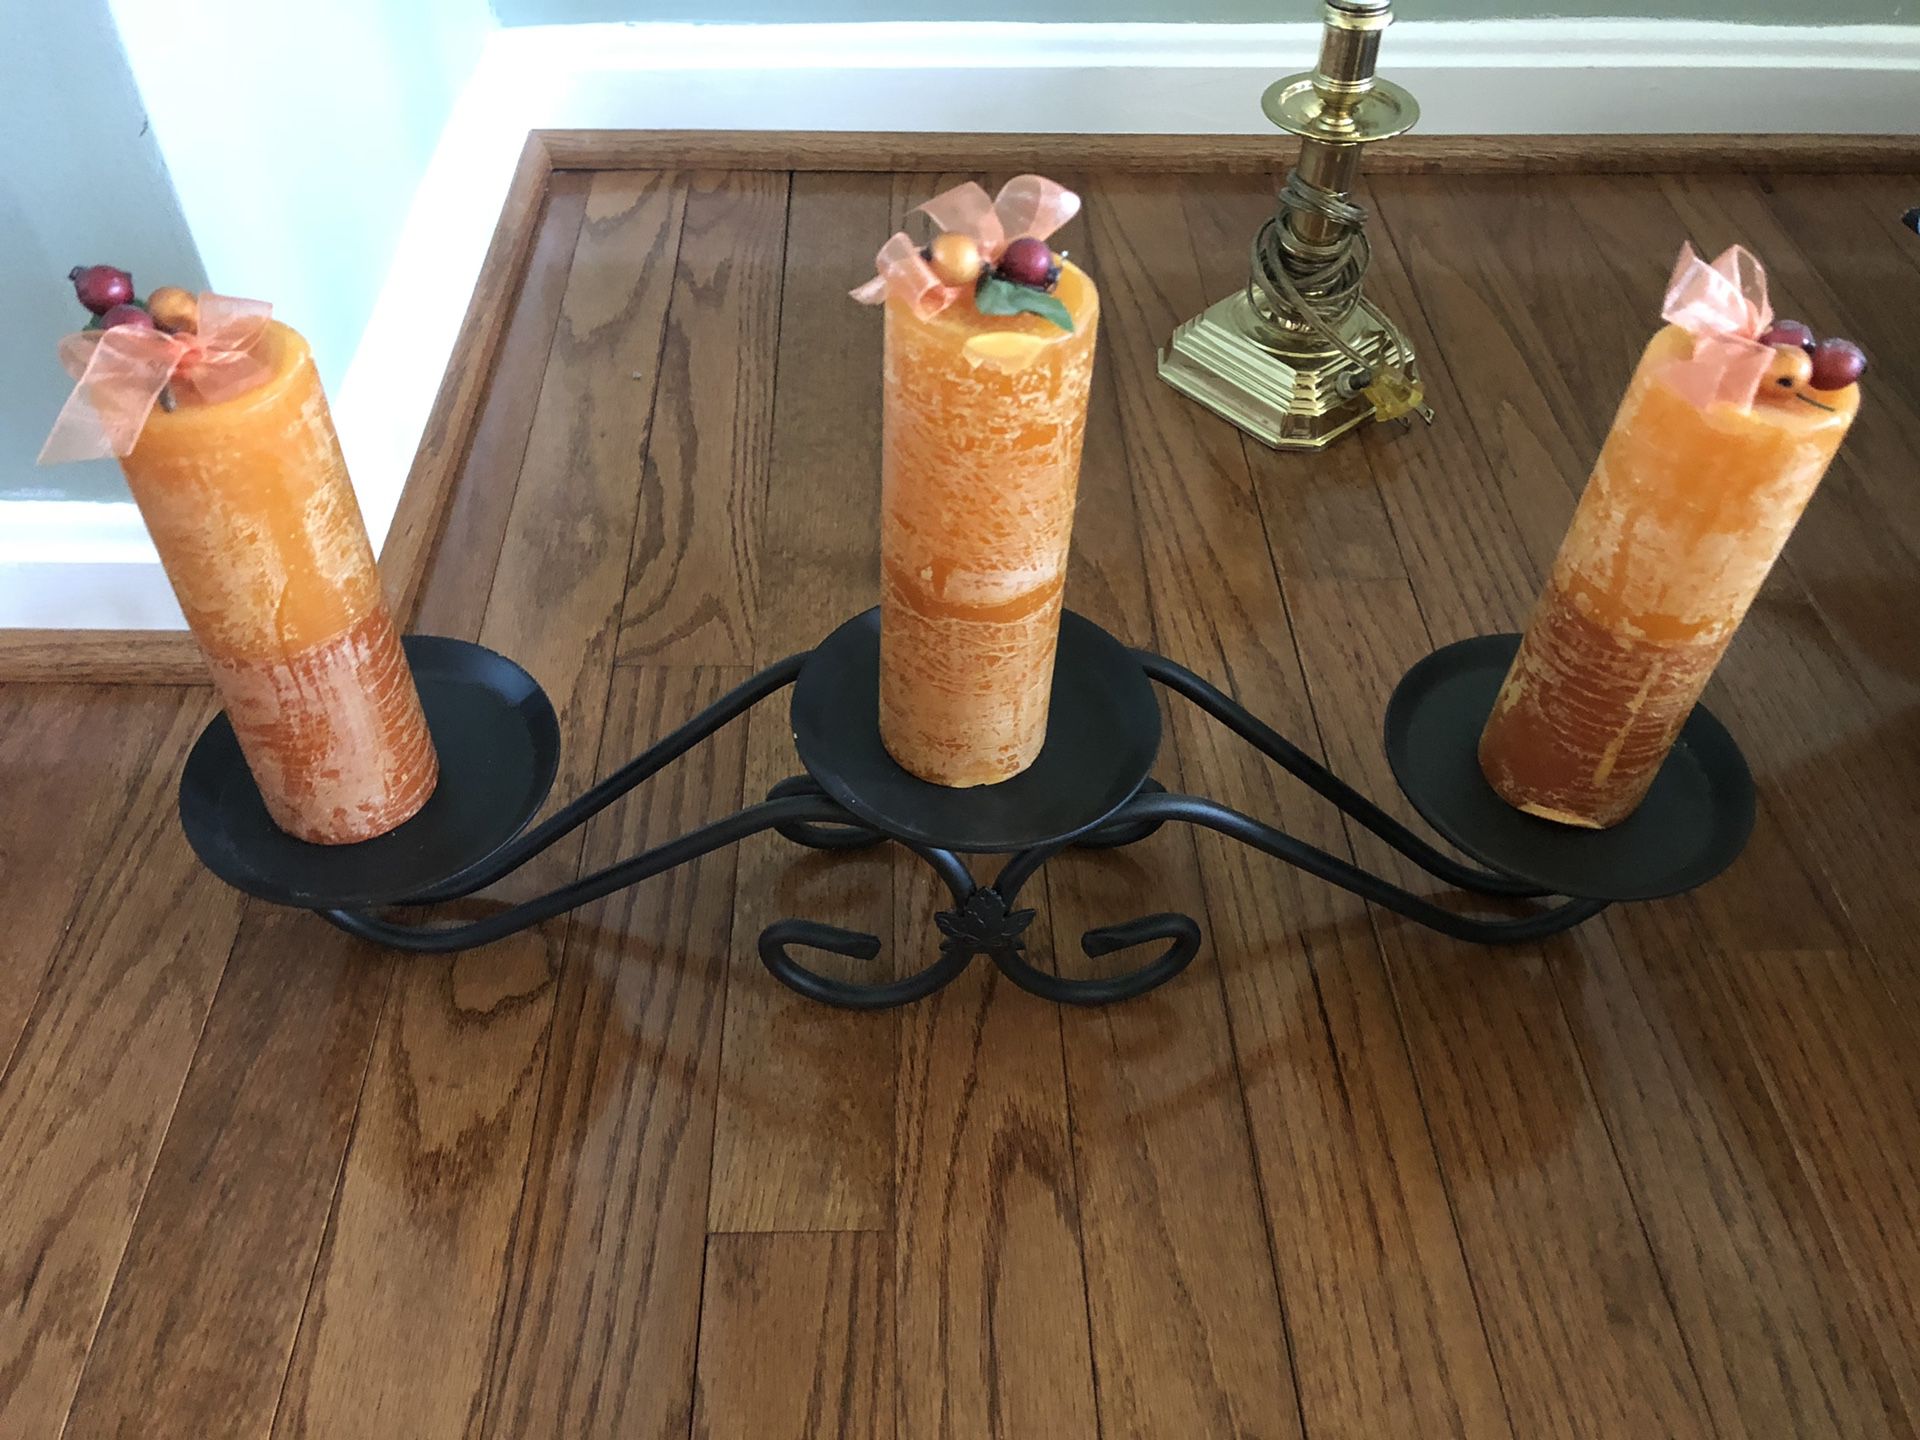 Candle display w/ three candles